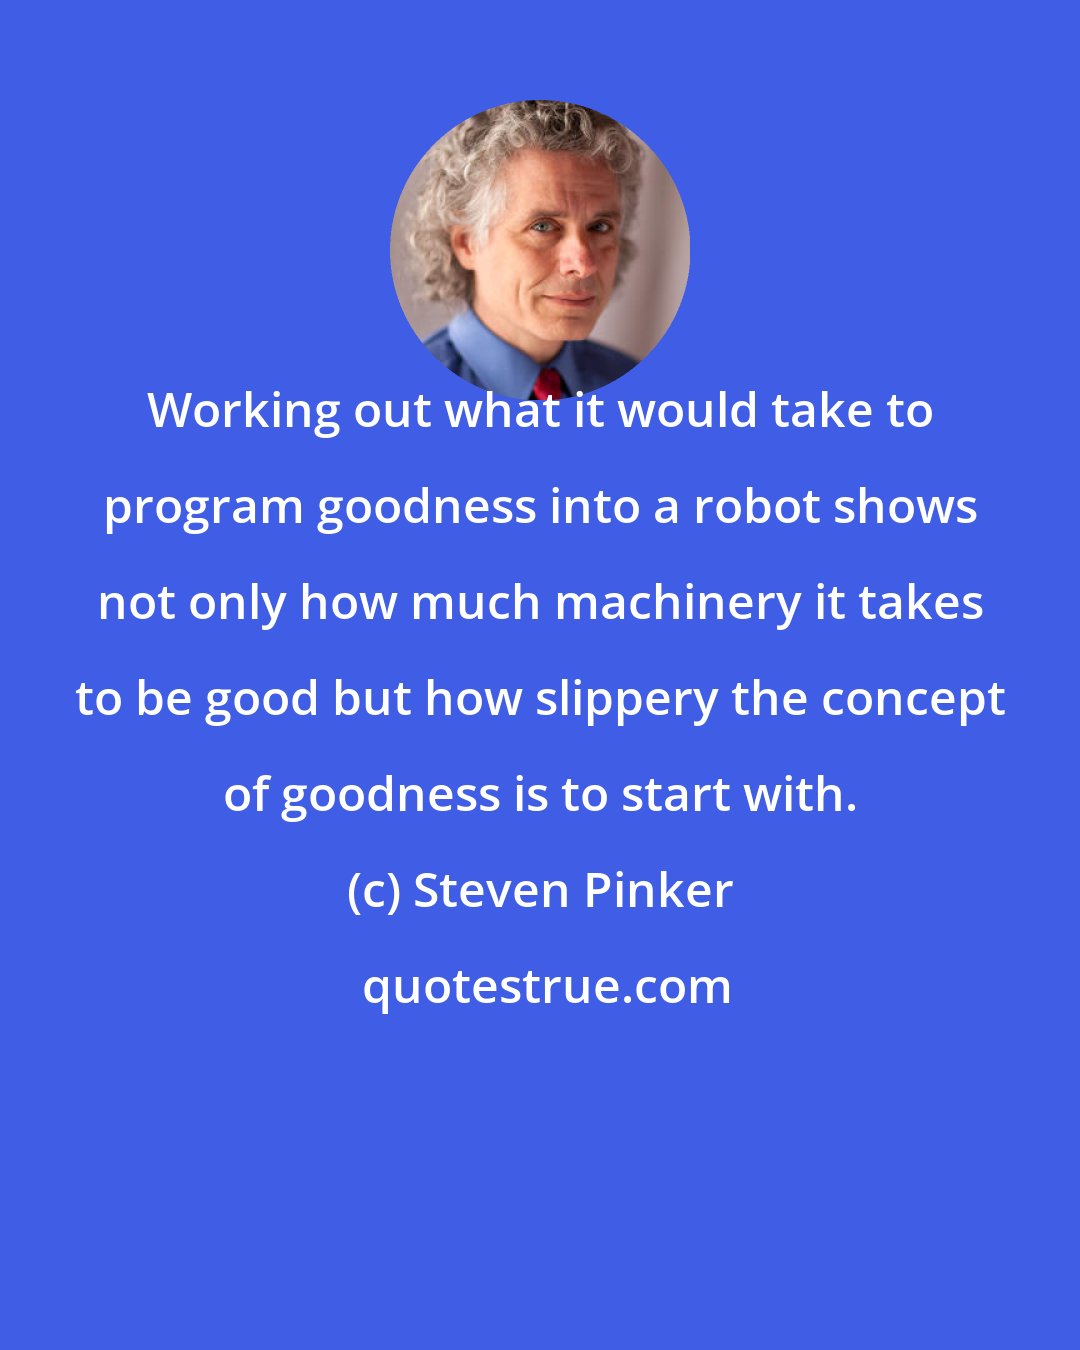 Steven Pinker: Working out what it would take to program goodness into a robot shows not only how much machinery it takes to be good but how slippery the concept of goodness is to start with.